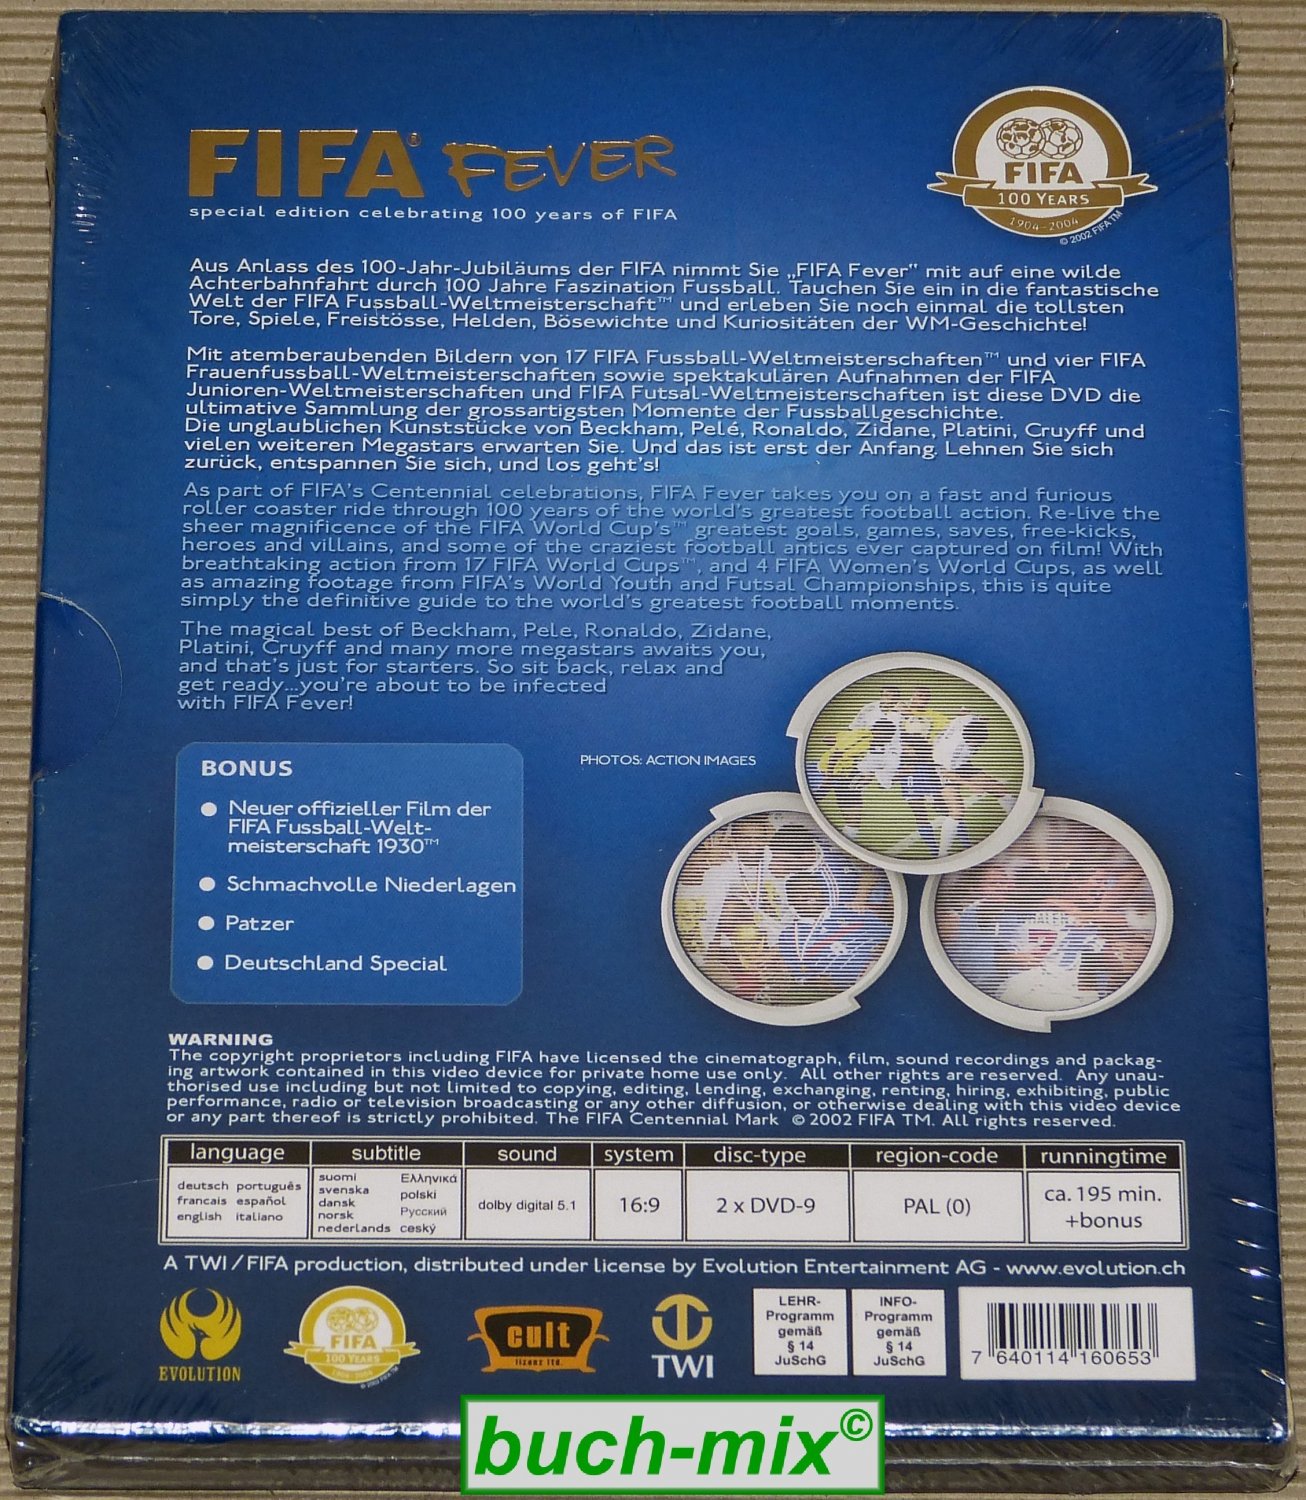 FIFA Fever - Celebrating 100 Years of FIFA - 2 DVDs“ – Film neu kaufen –  A02hUXsF11ZZD